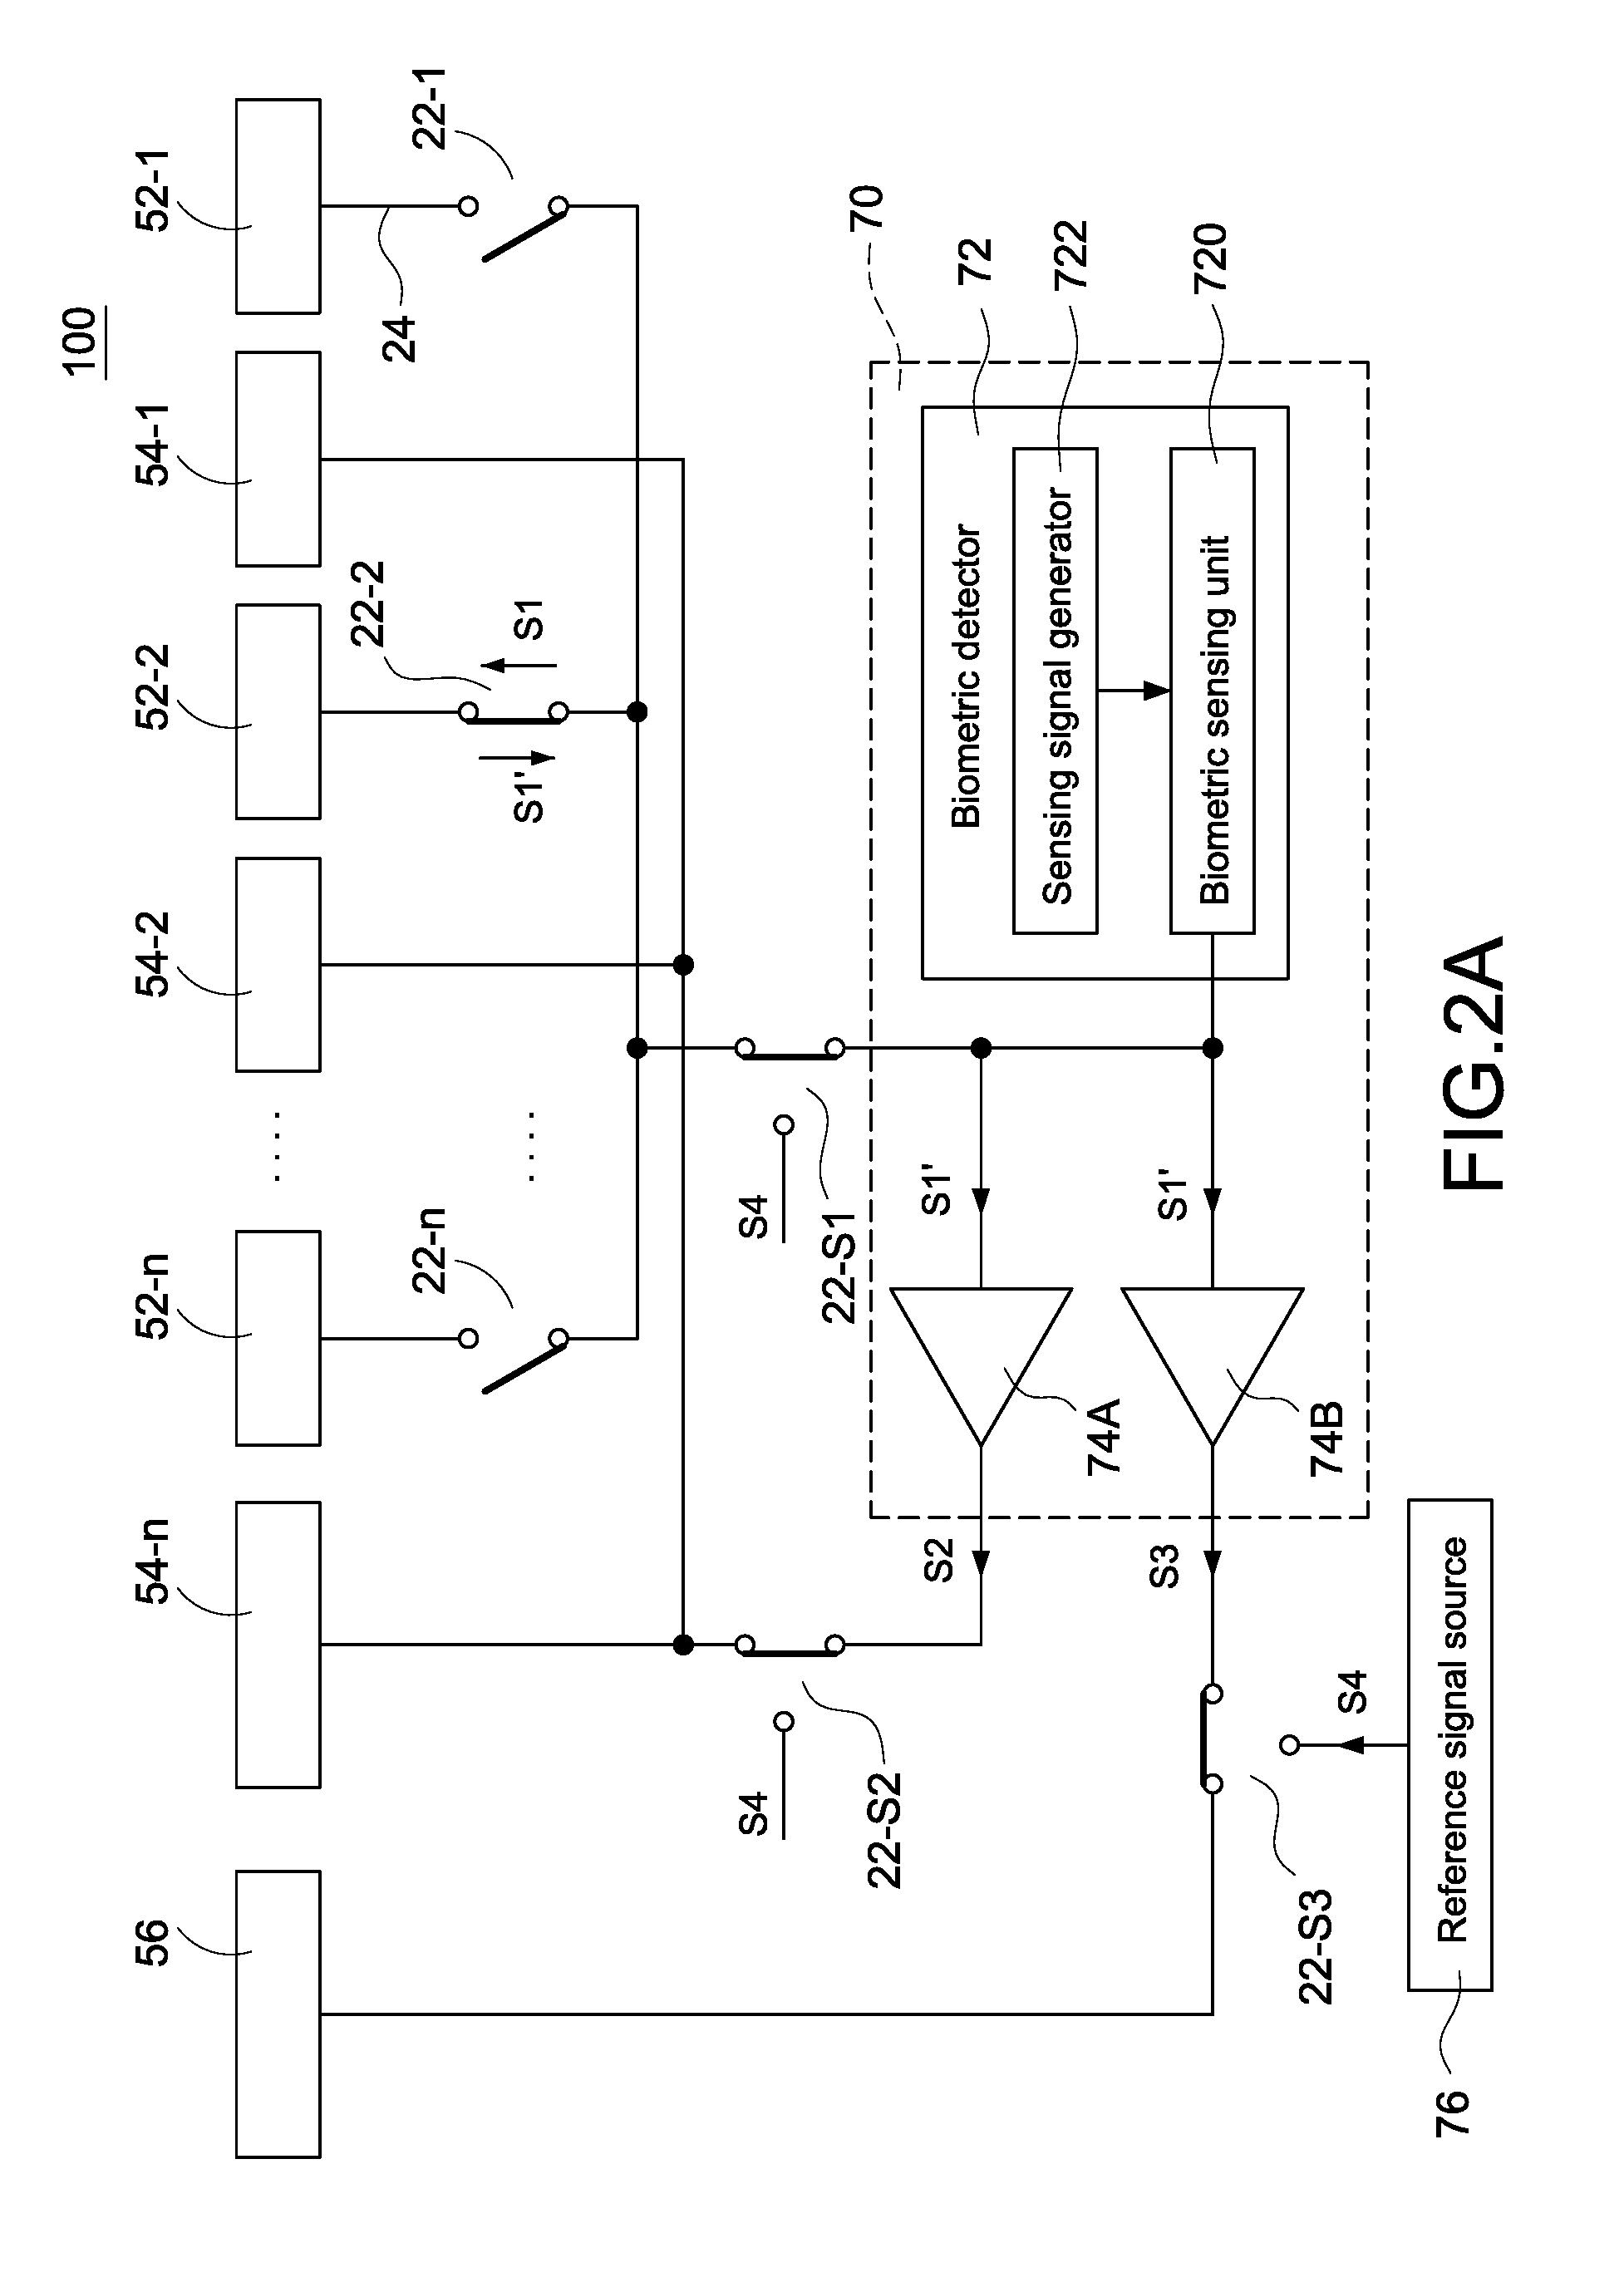 Biometric recognition apparatus with deflection electrode